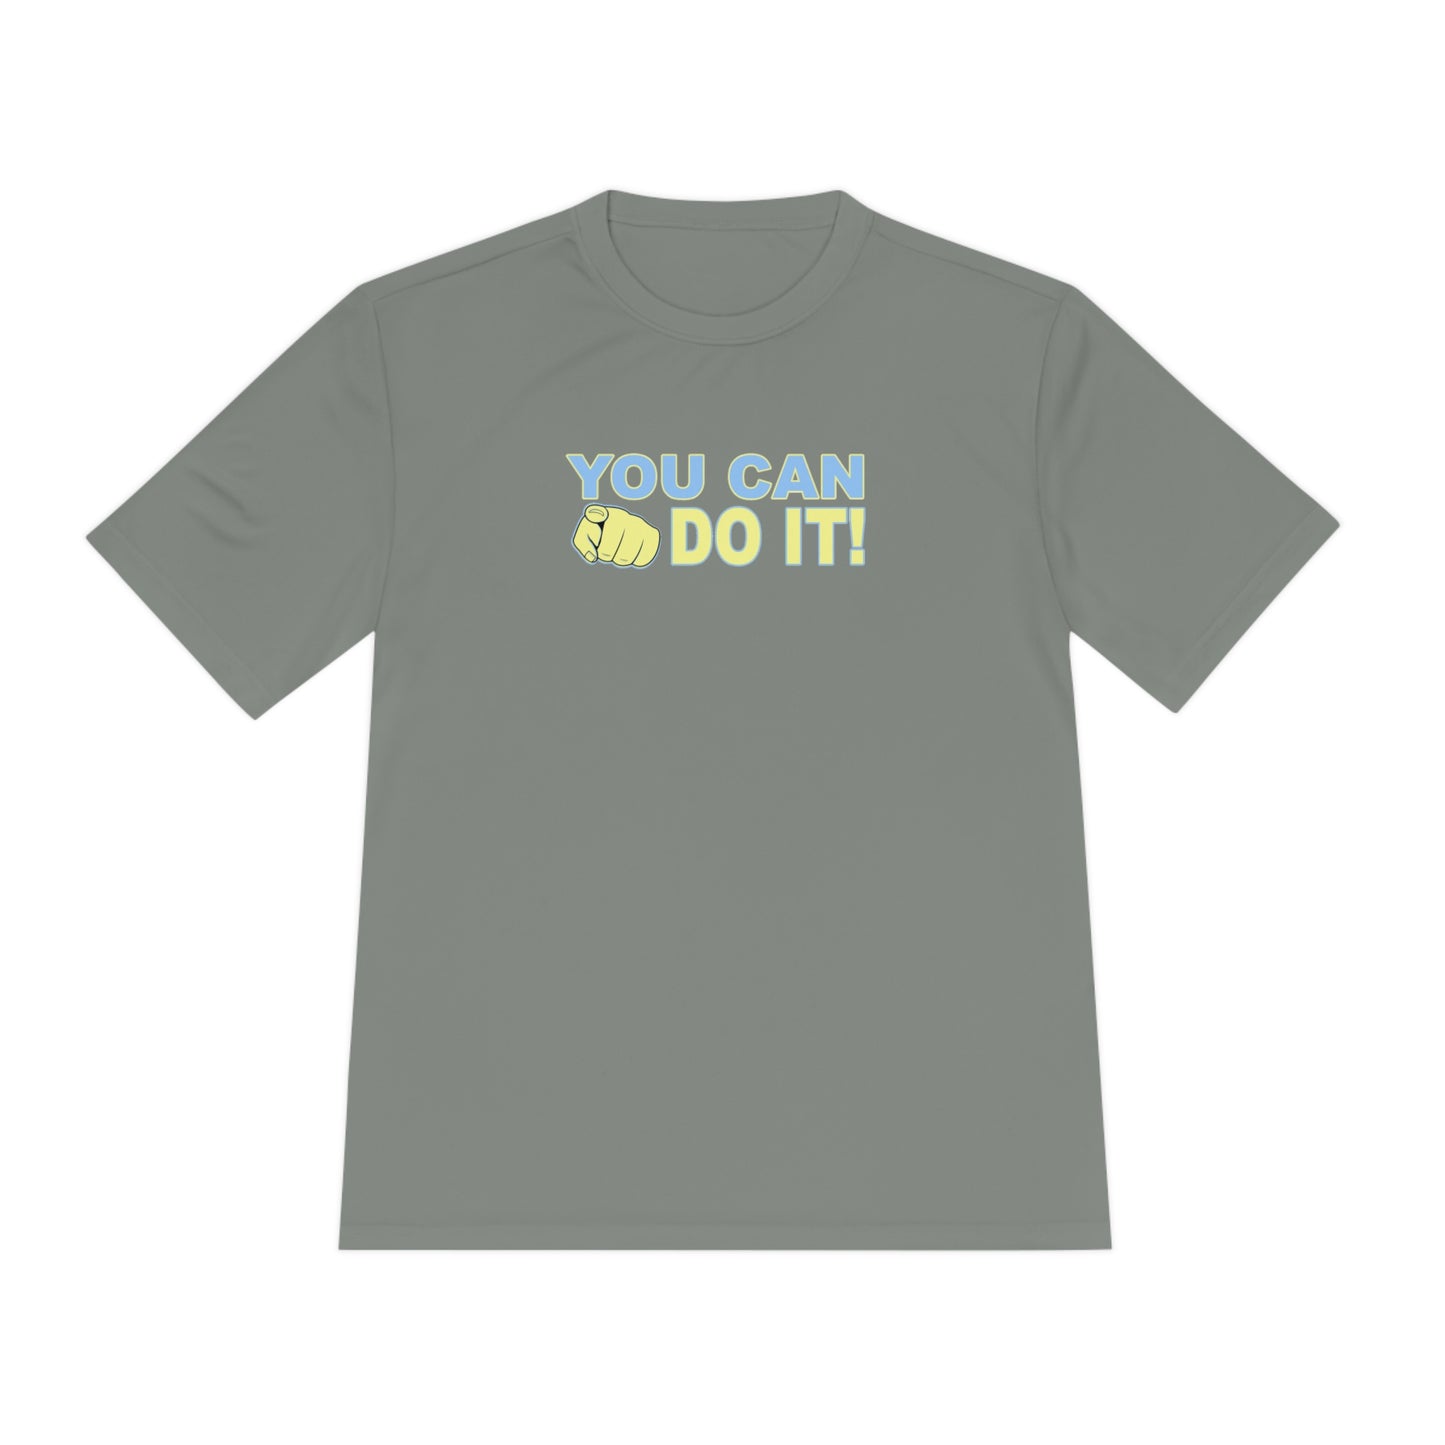 A You Can Do It - Men's Competitor Tee in plain gray featuring the motivational phrase "you can do it!" printed in bold yellow letters at the center, accompanied by a small graphic of a clenched fist by Printify.